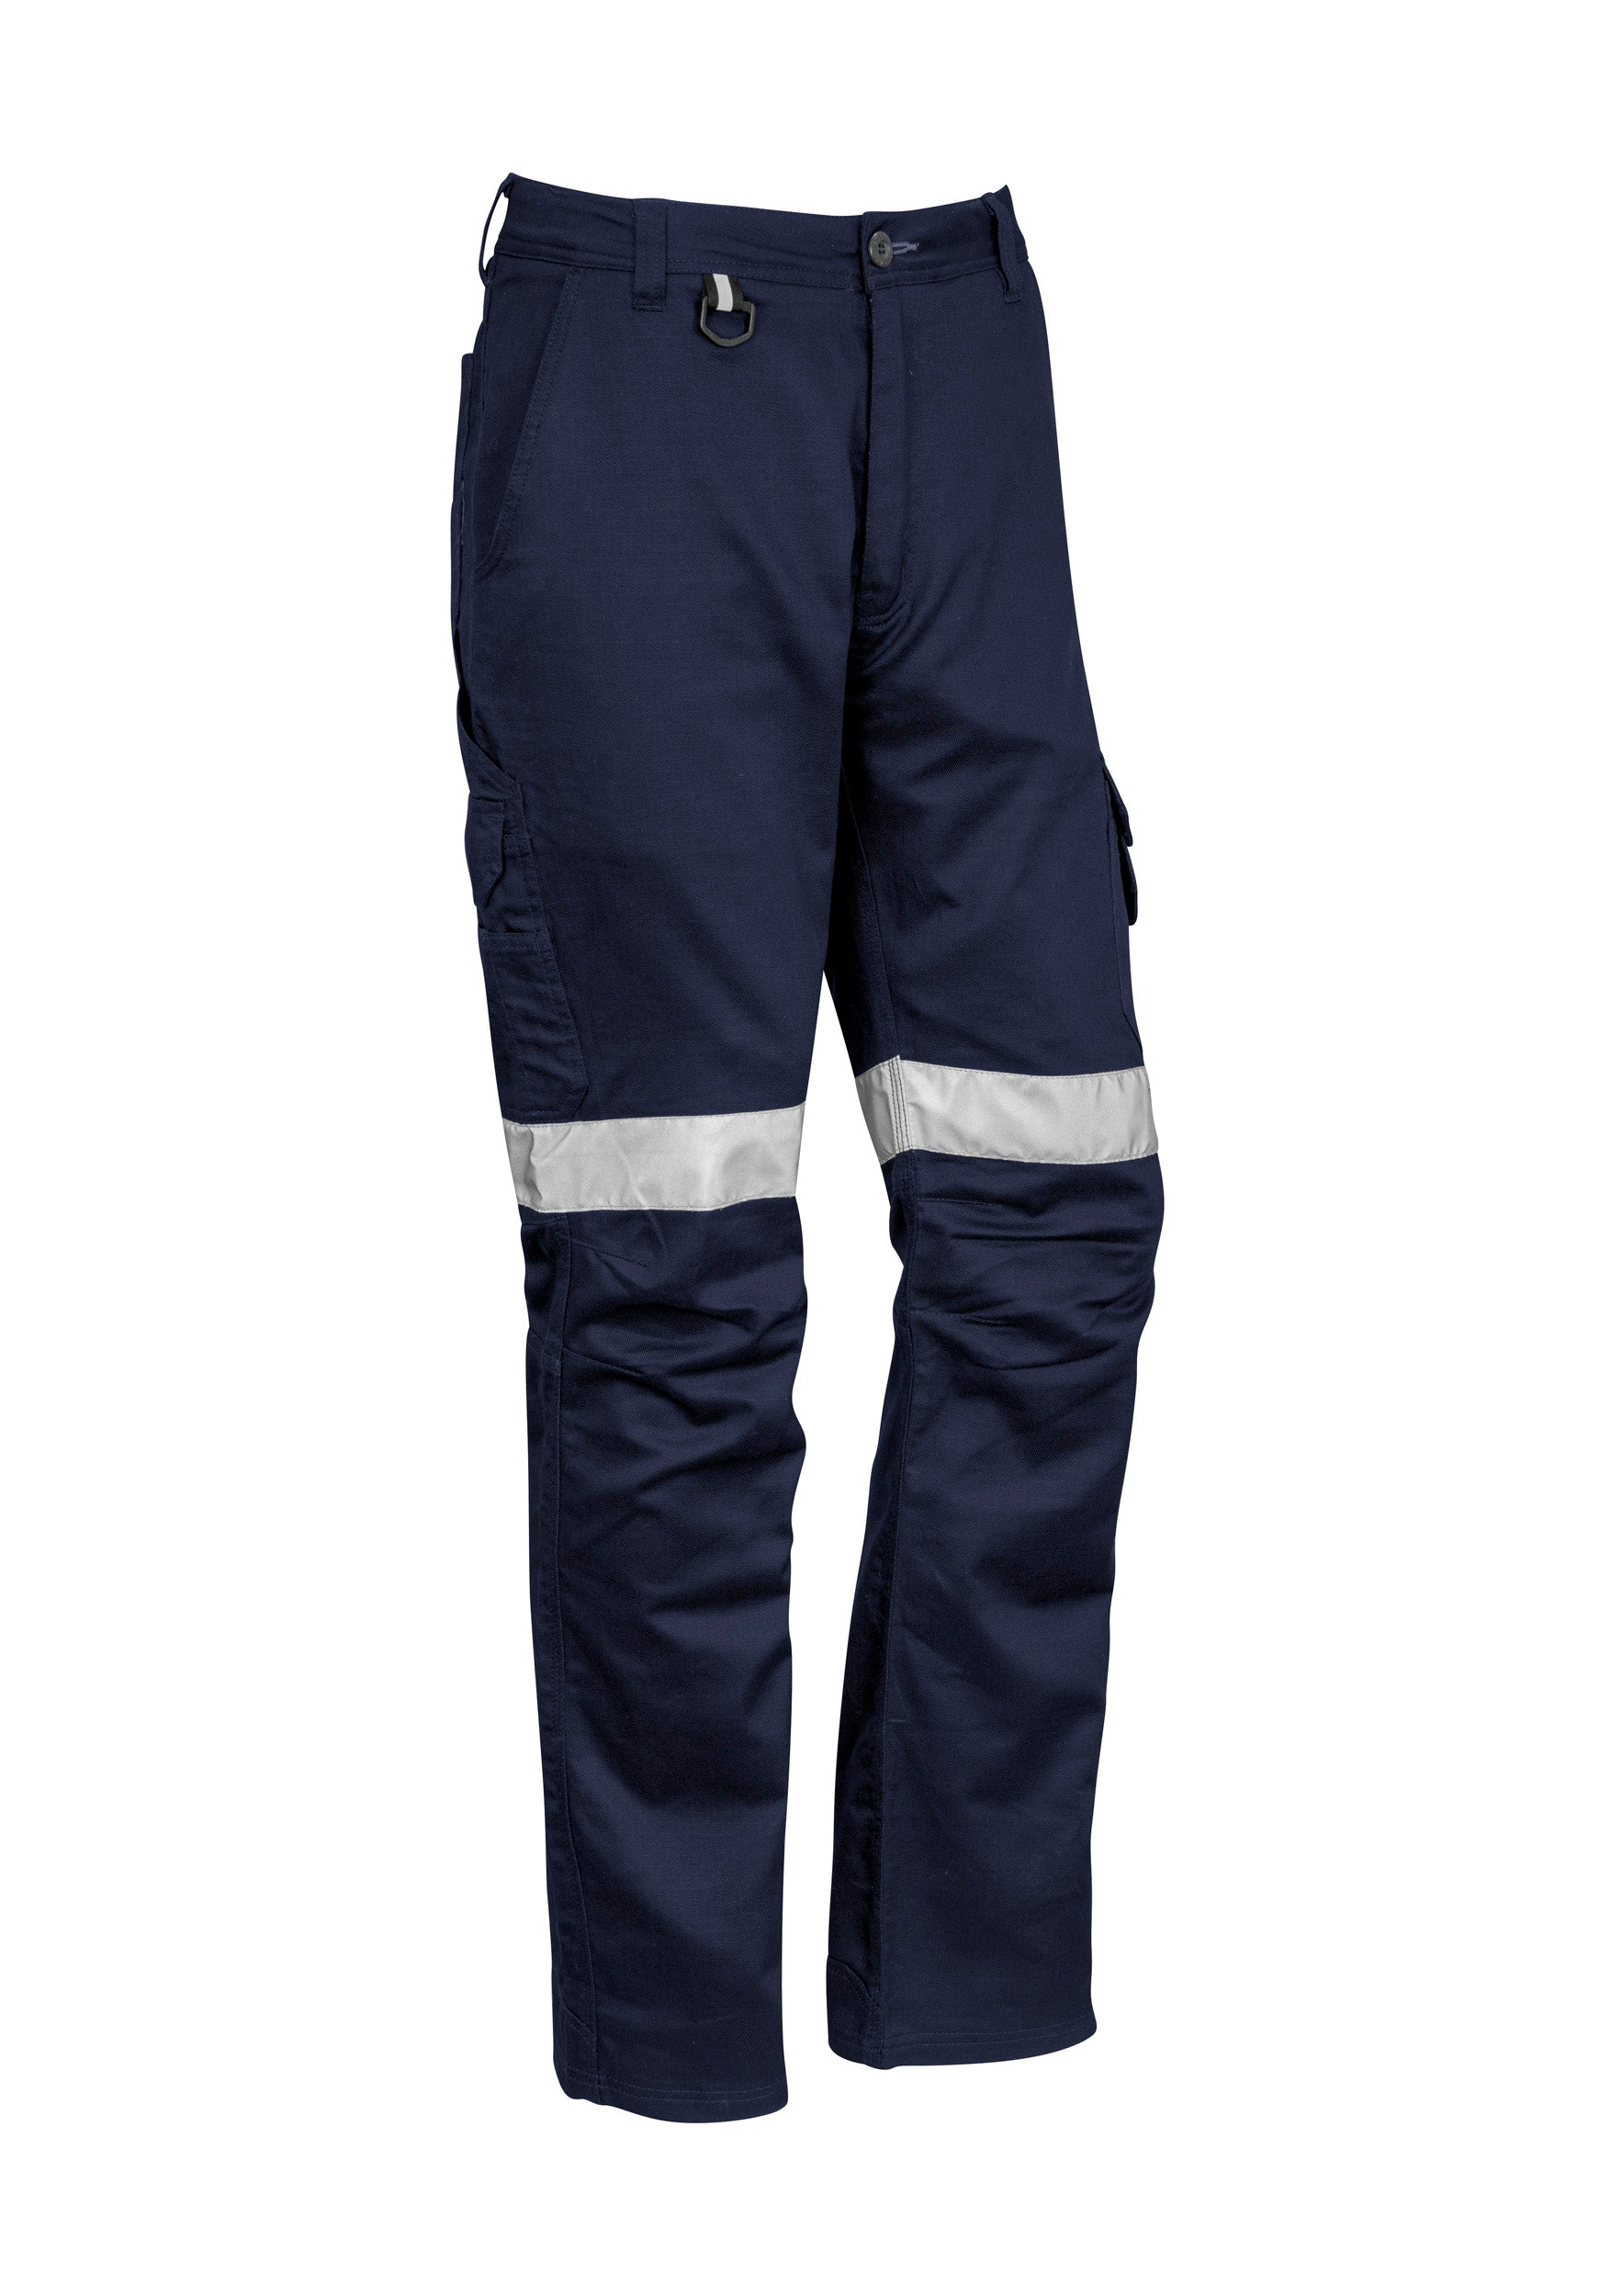 Syzmik ZP904S Men's Rugged Cooling Taped Pant (Stout) NAVY